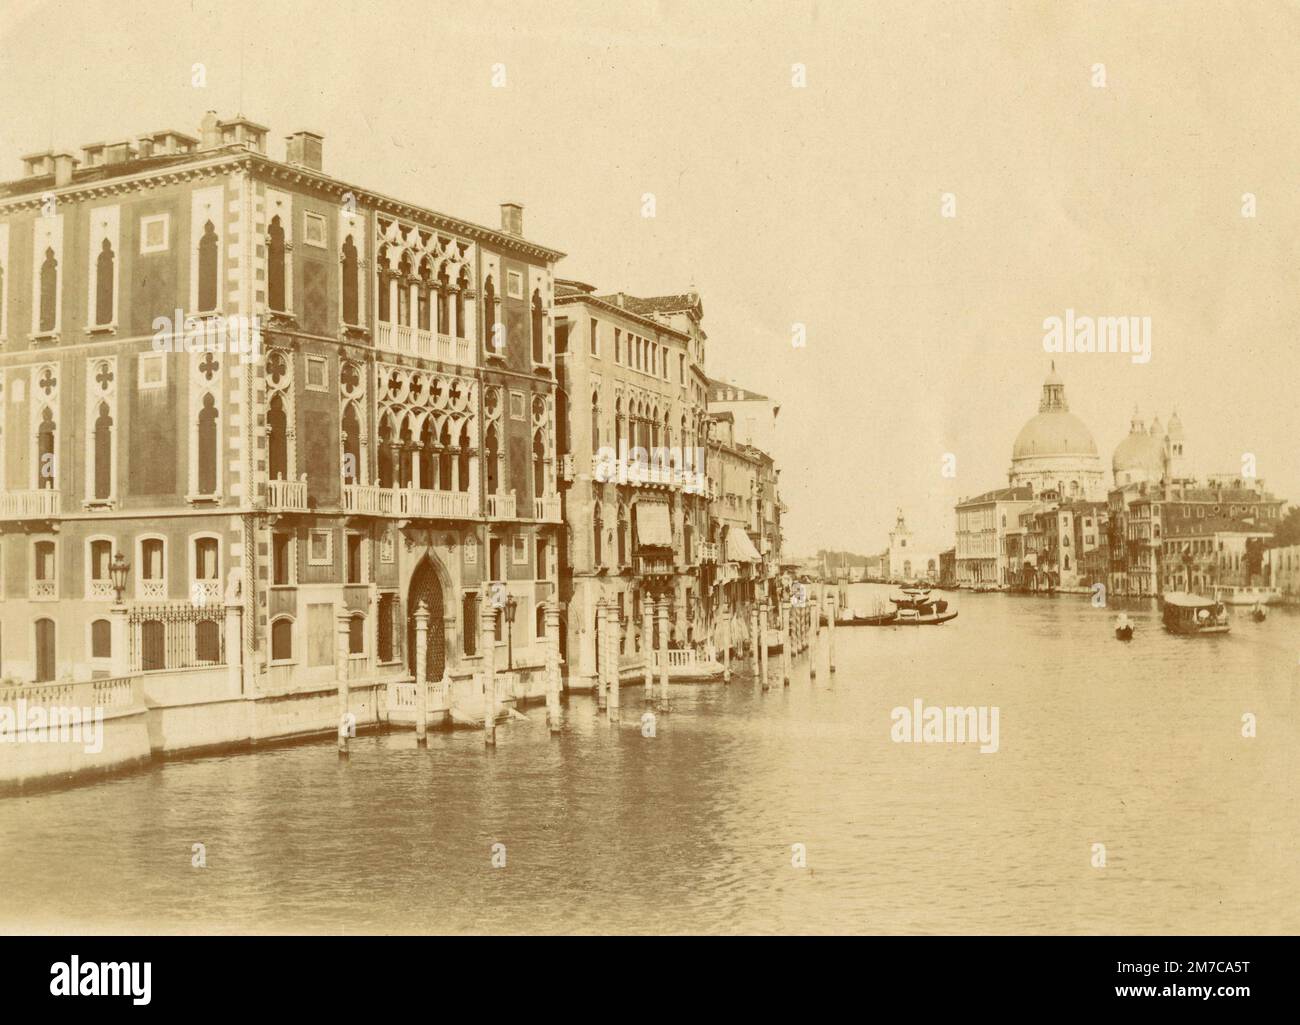 View of the Canal, Venice, Italy 1860s Stock Photo